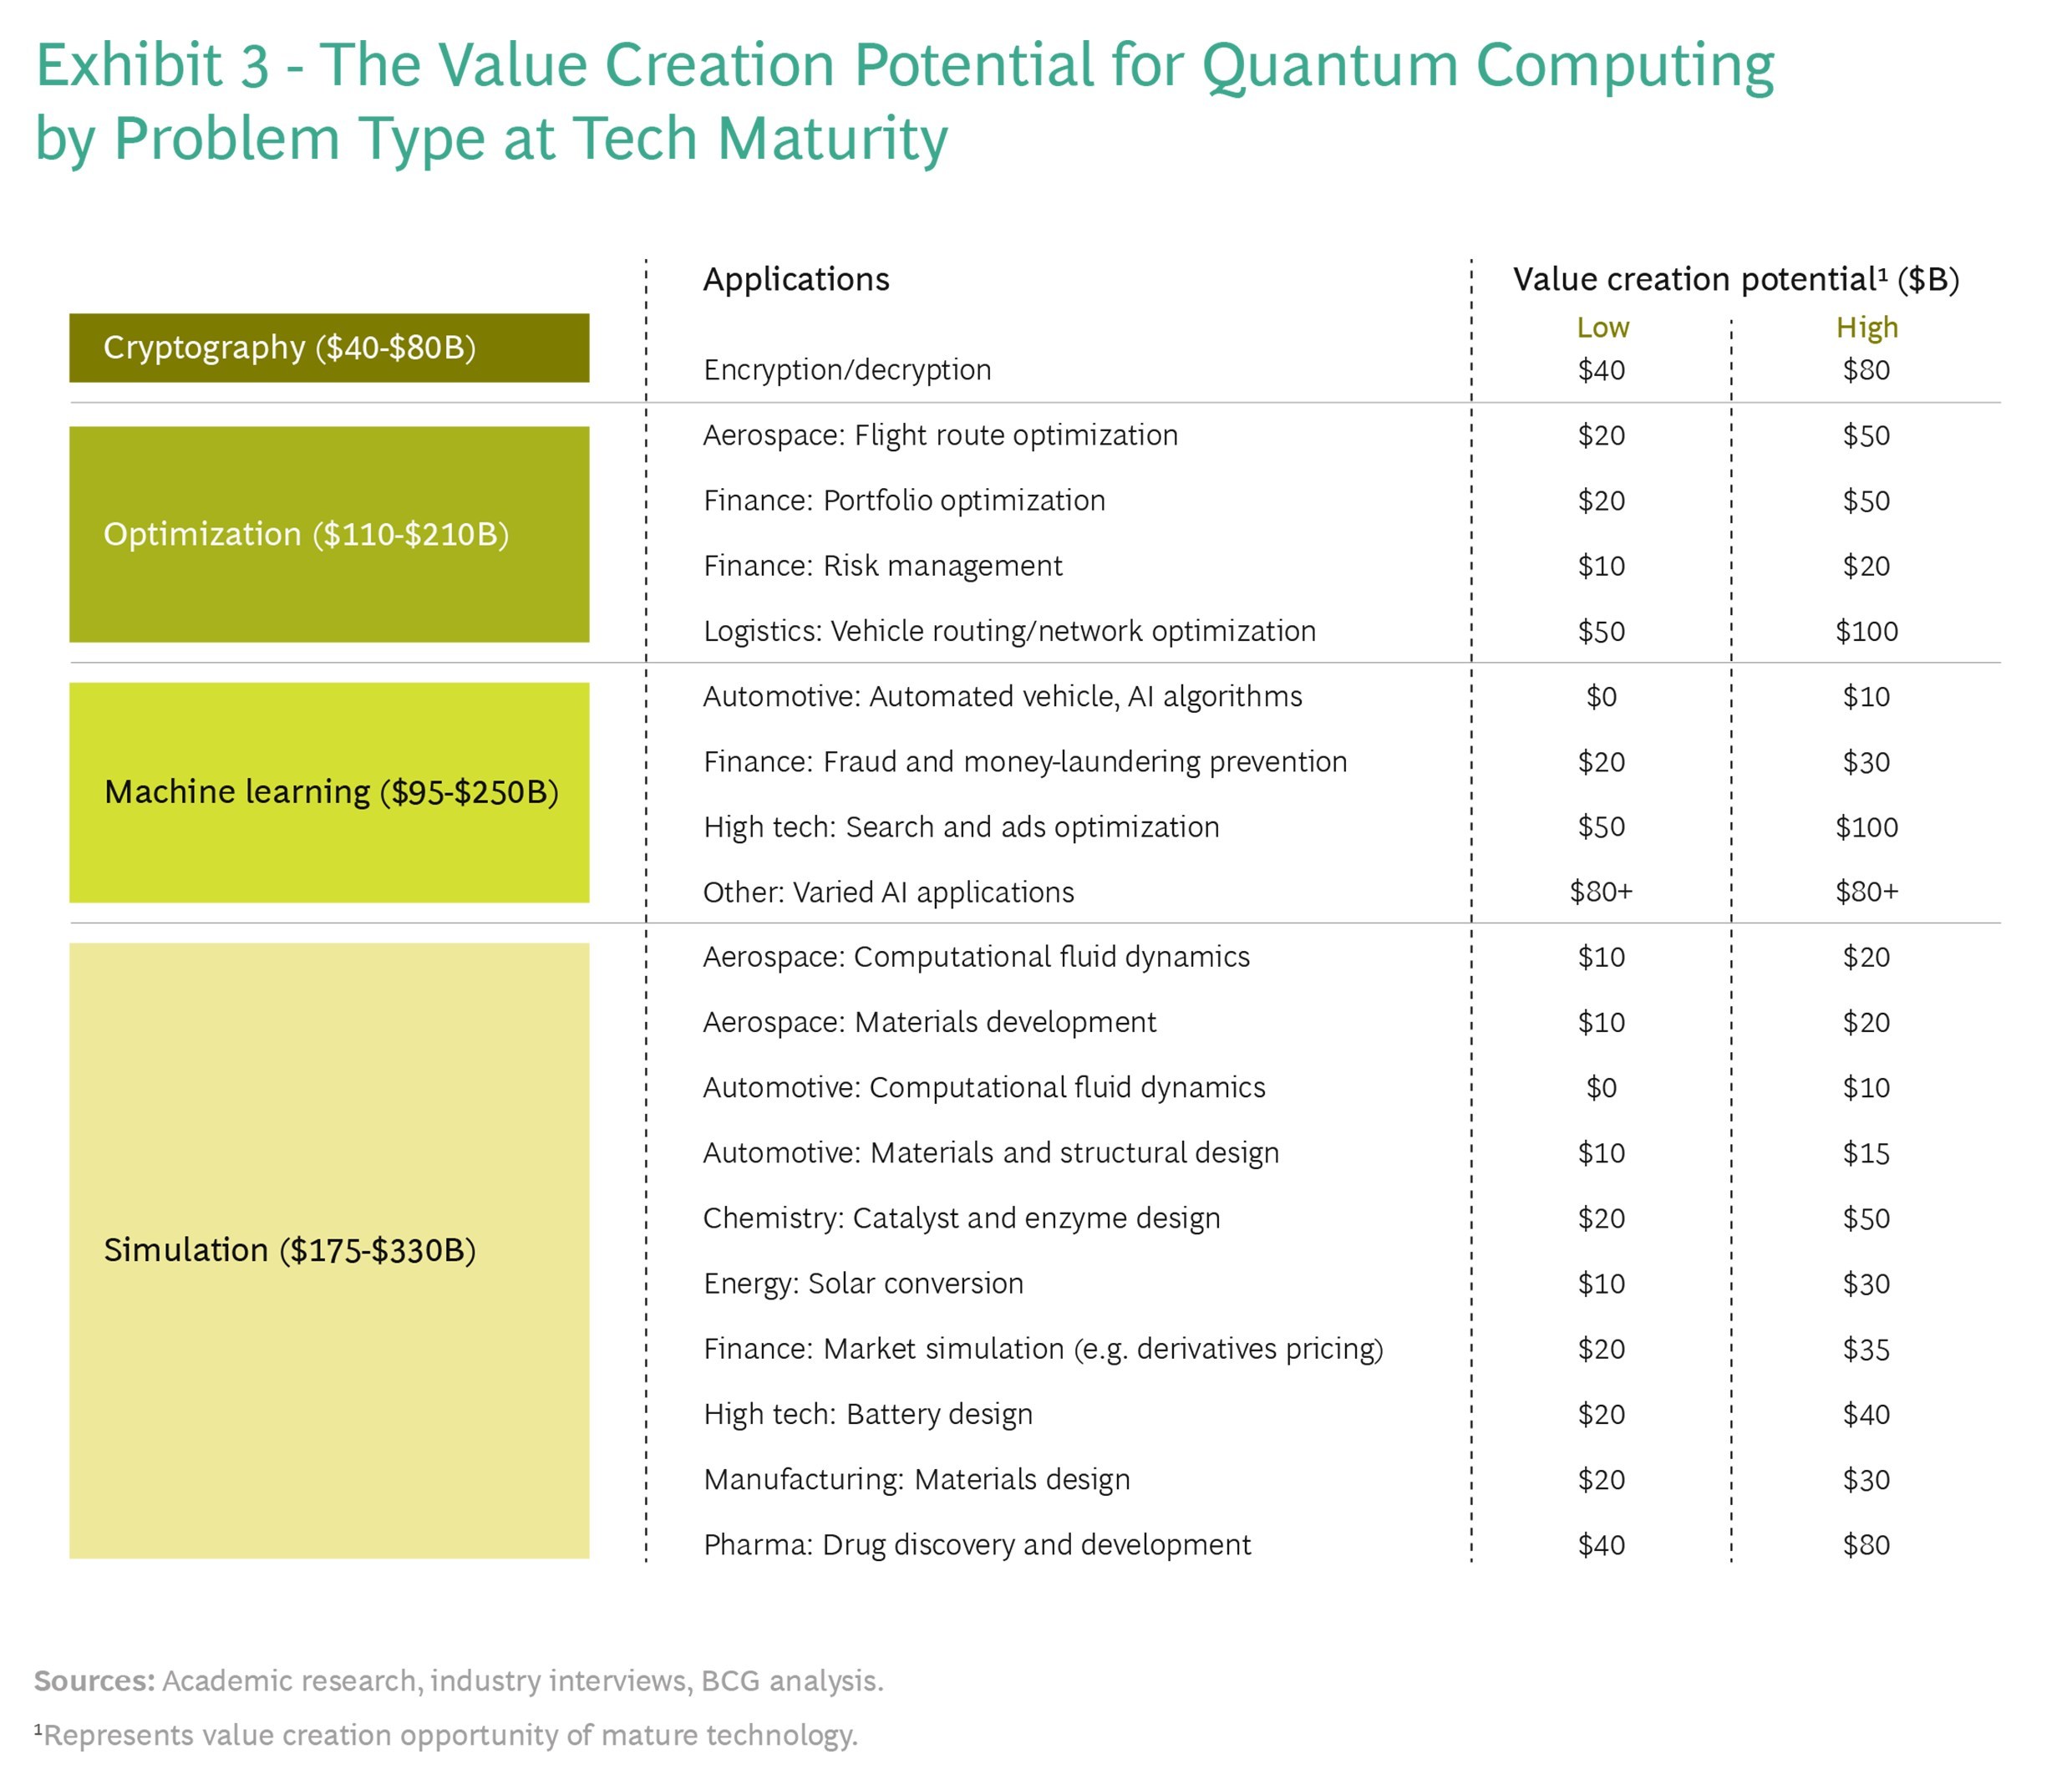 The BCG research estimates that quantum computing will unlock new value across many industries, creating up to $850 billion in annual value by 2040.